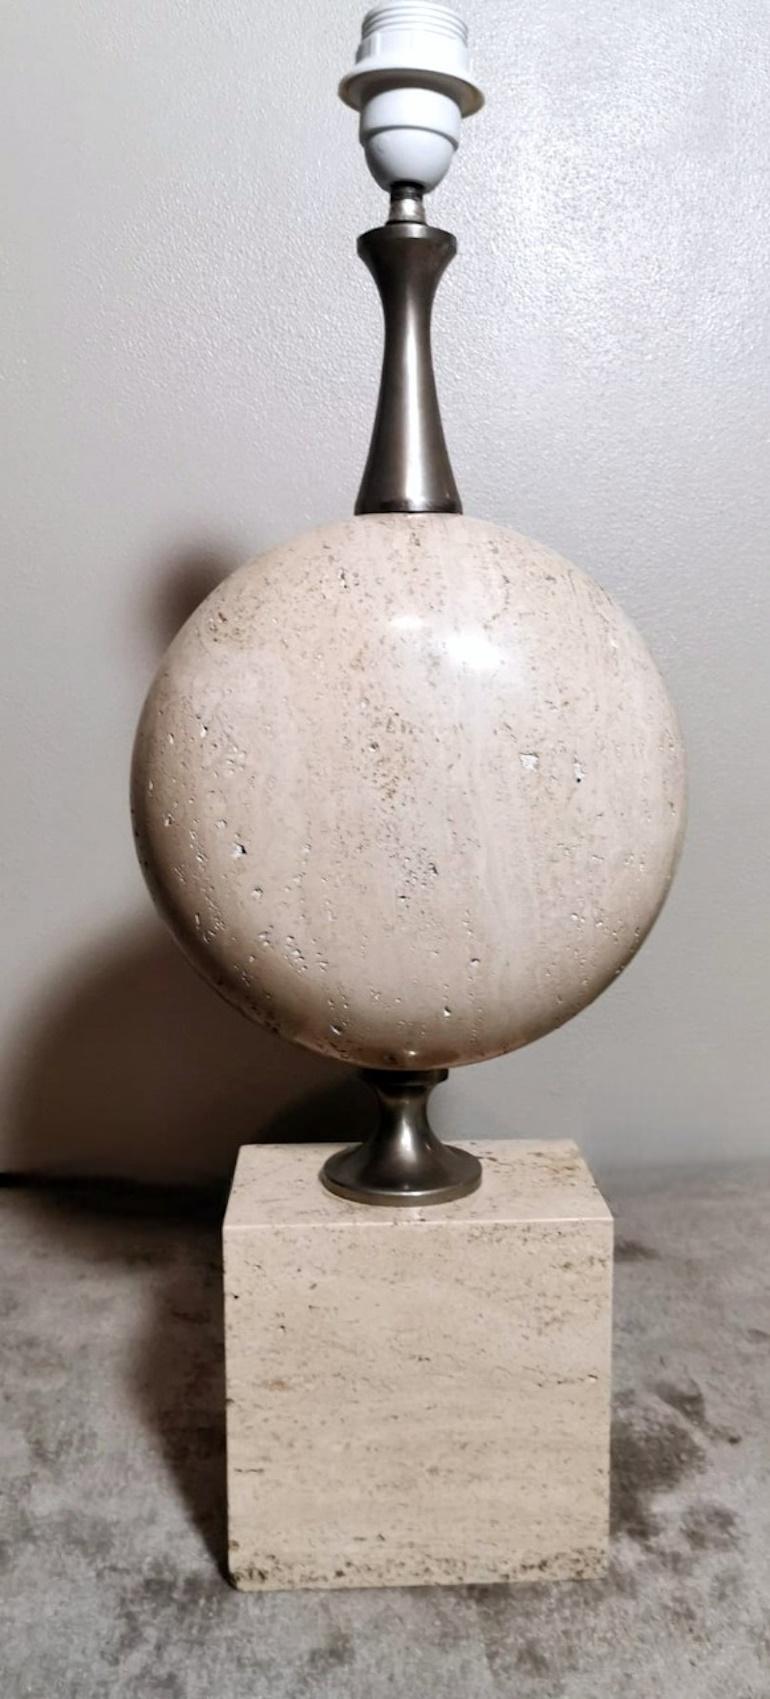 We kindly suggest that you read the entire description, as with it we try to give you detailed technical and historical information to guarantee the authenticity of our objects.
A very elegant lamp in travertine; the parallelepiped-shaped base